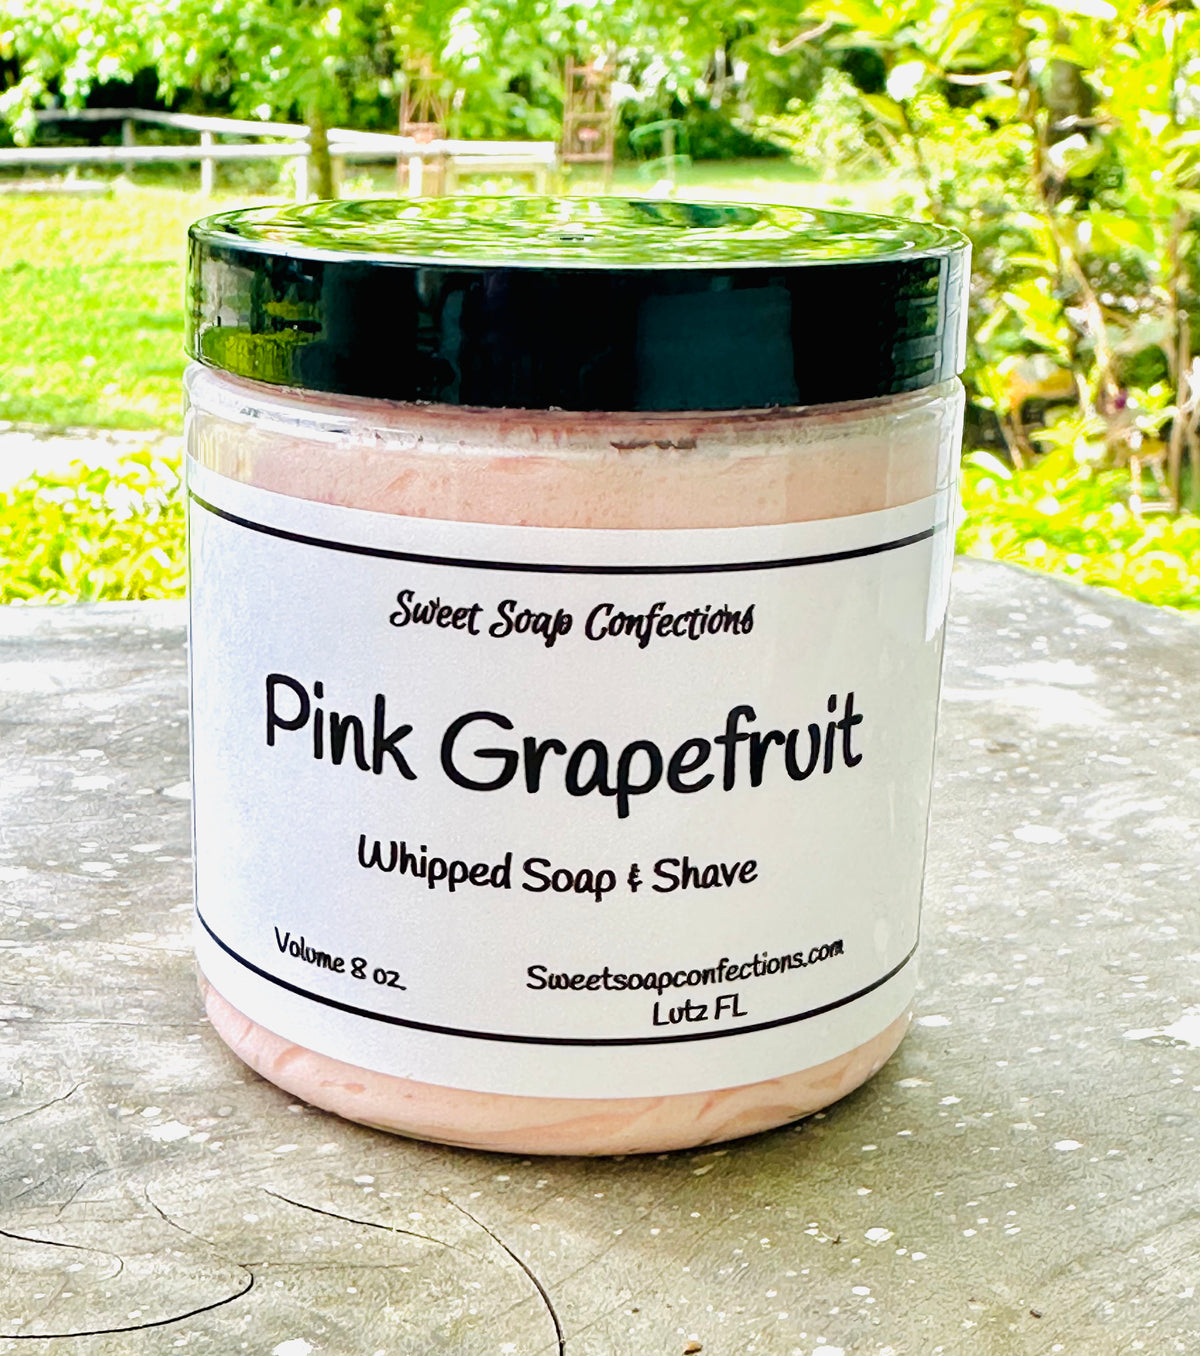 Pink Grapefruit Whipped Soap and Shave